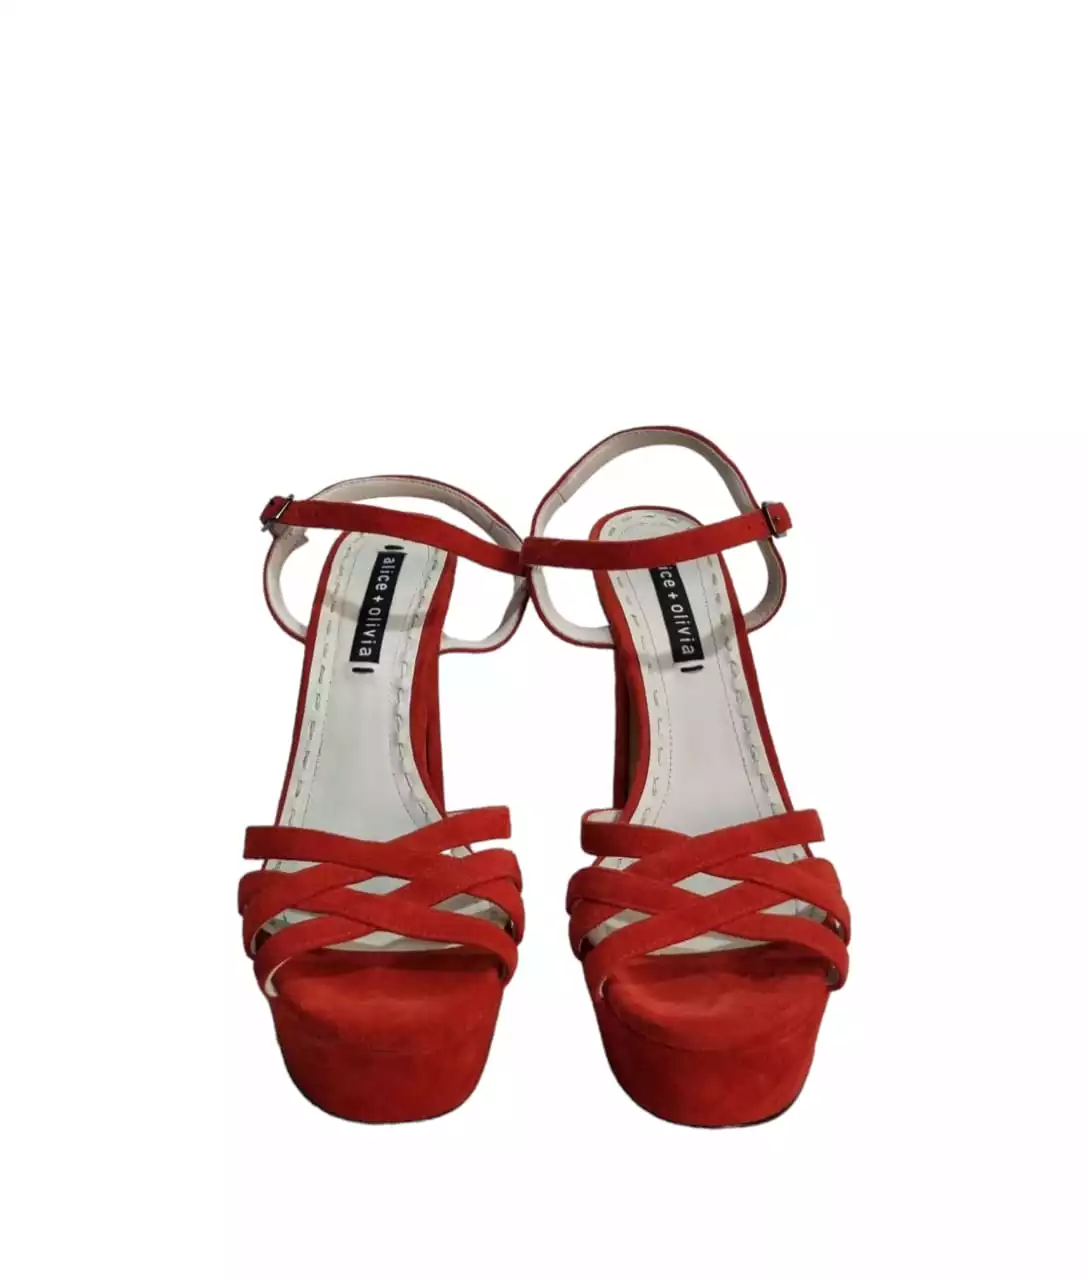 Shoes by Alice+Olivia